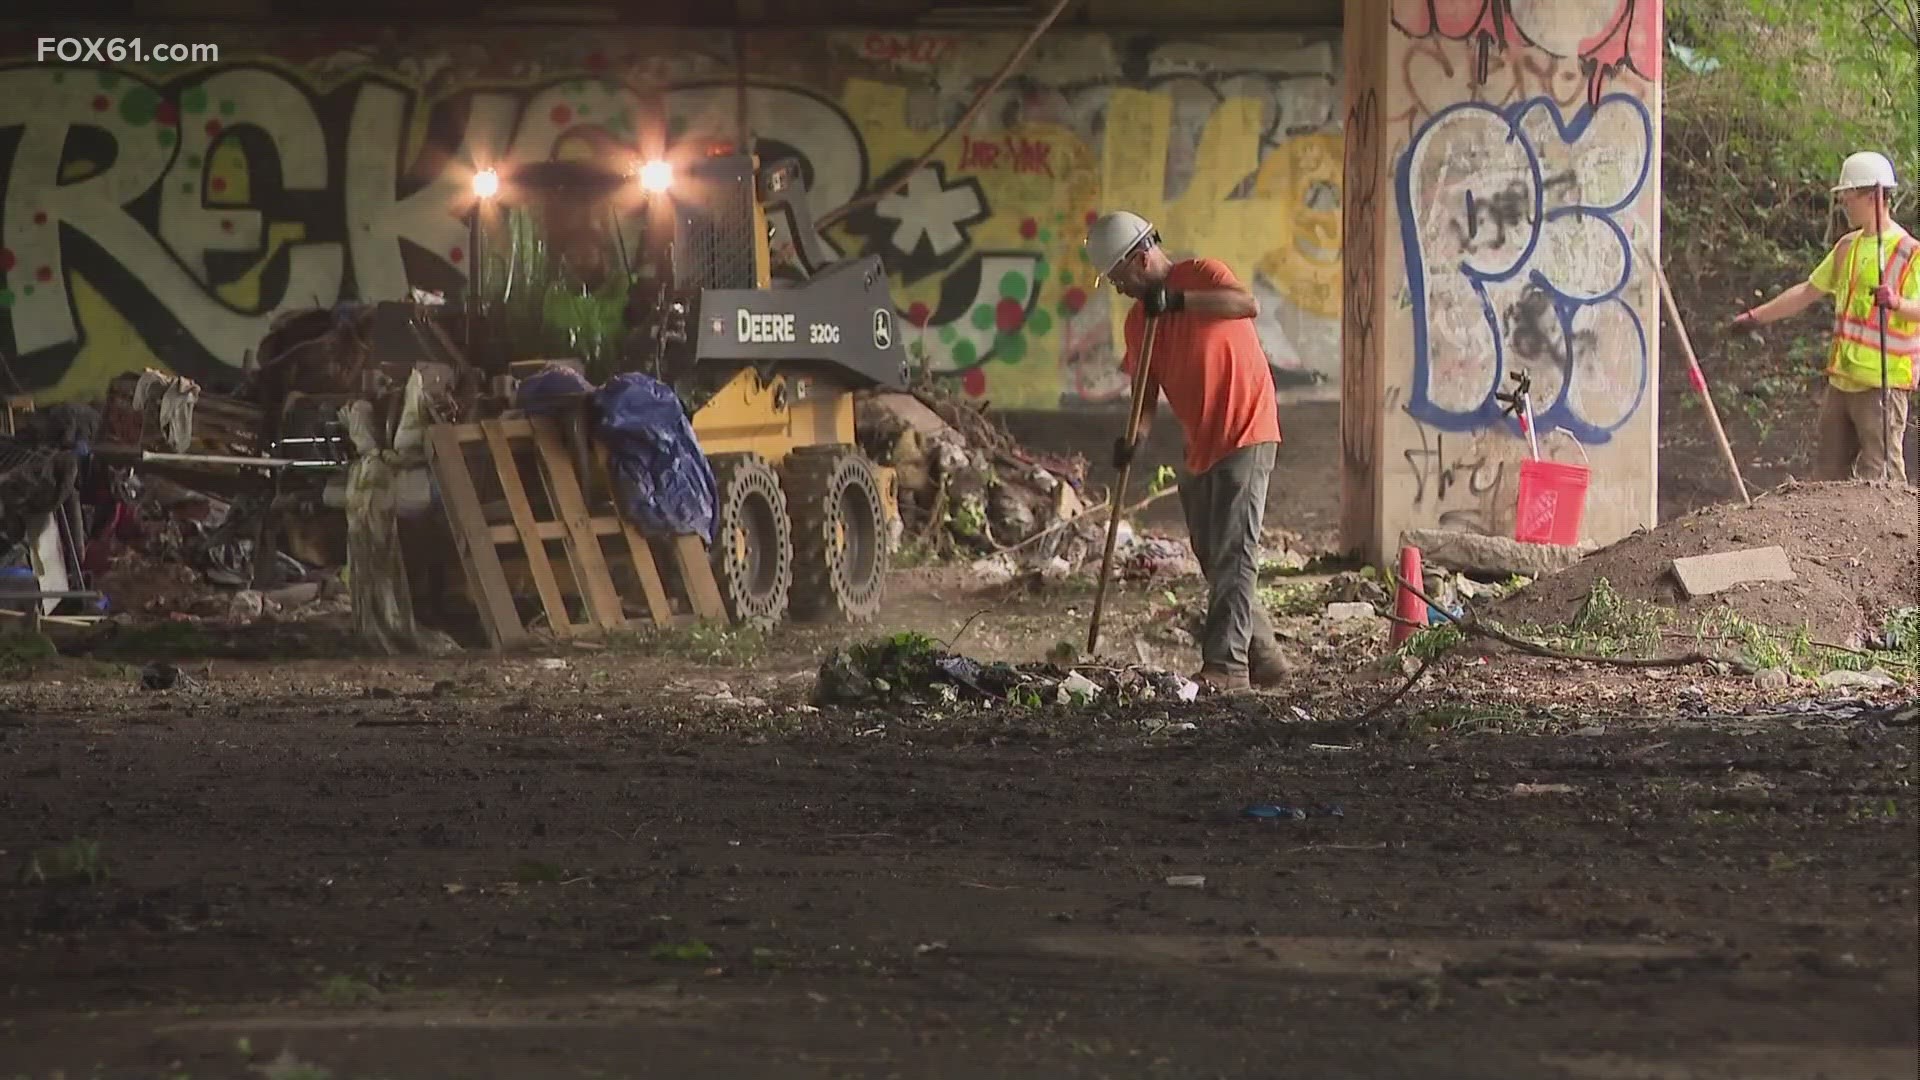 The encampment existed for years, but 11 days ago, officials promised they'd clear it out.